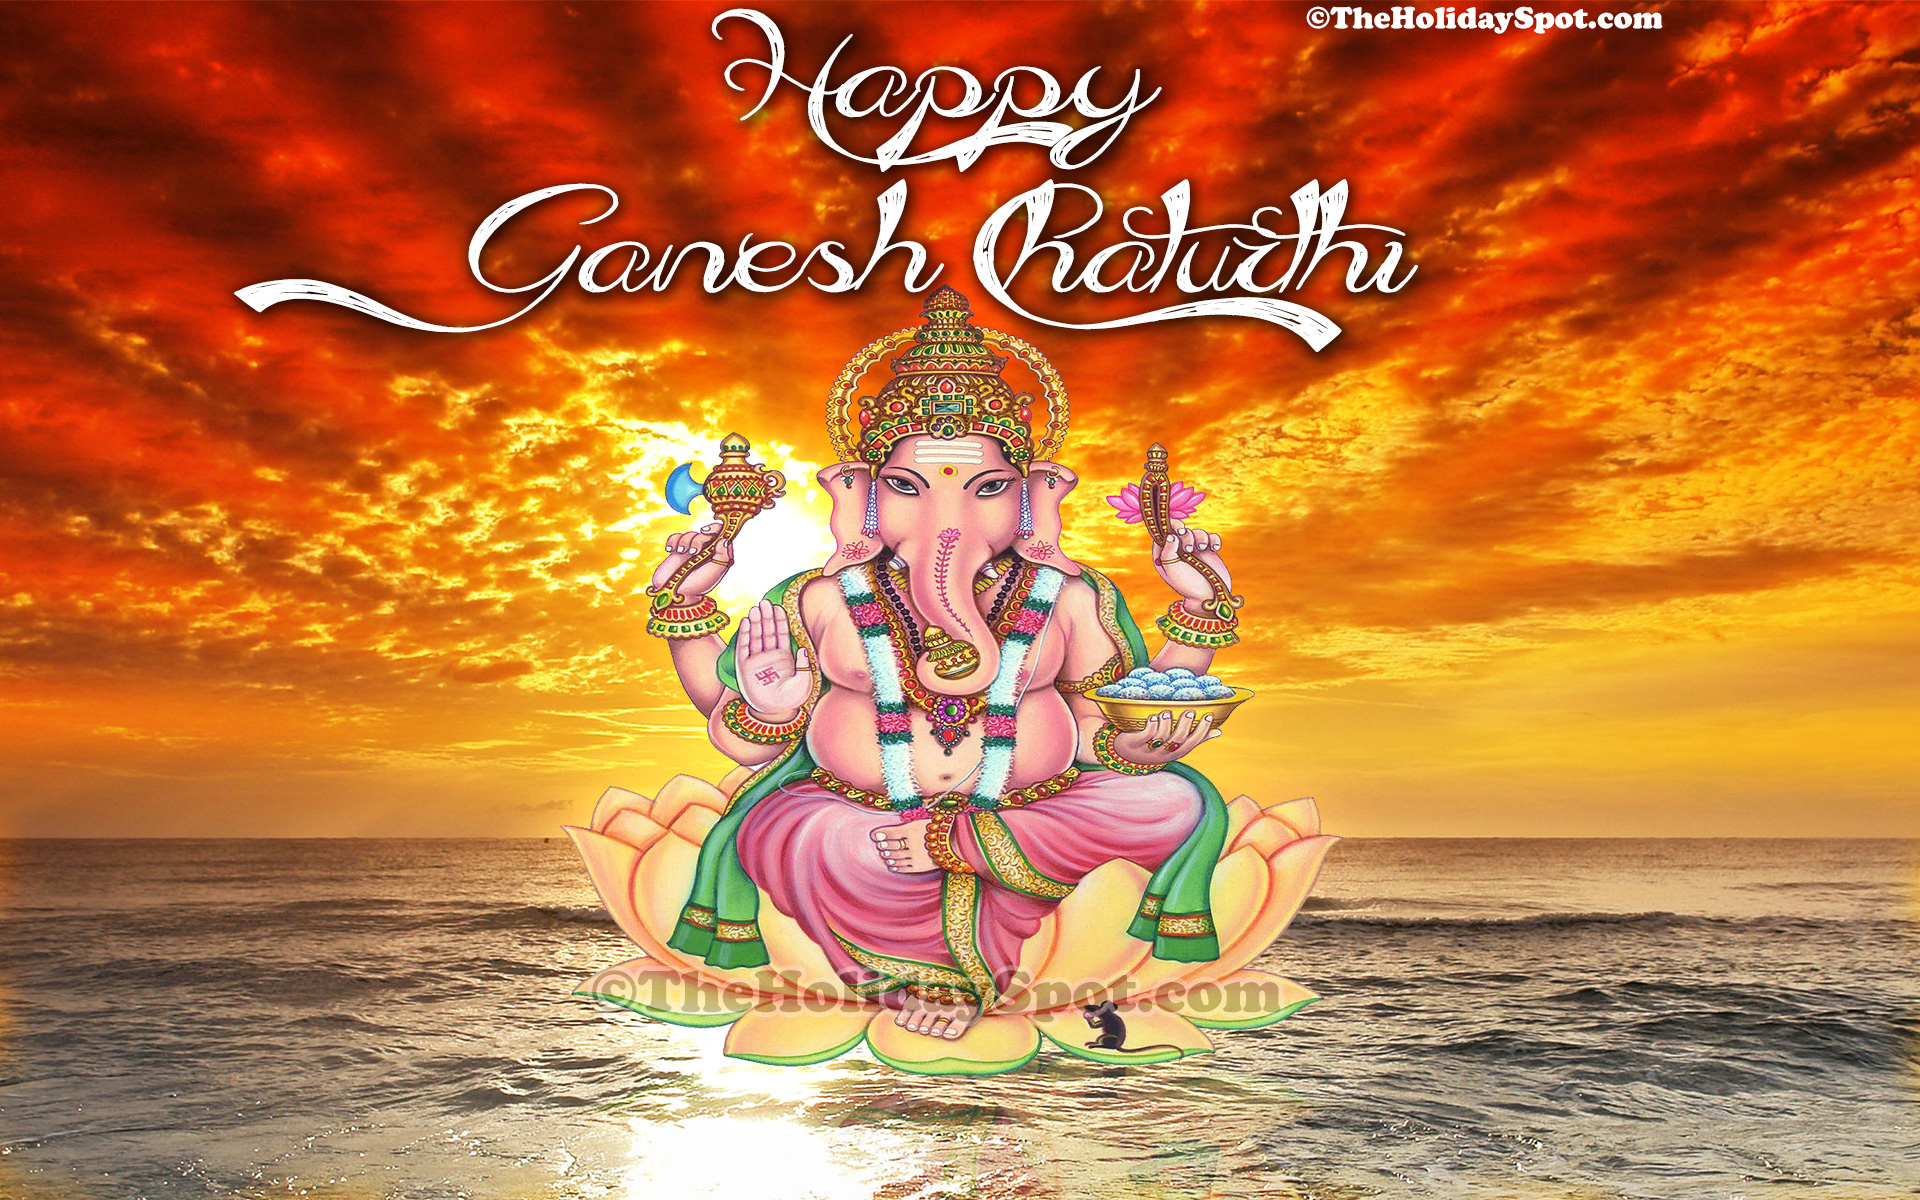 Ganesh Chaturthi Wallpapers And Images 21 Lord Ganesha Hd Wallpapers Free Download